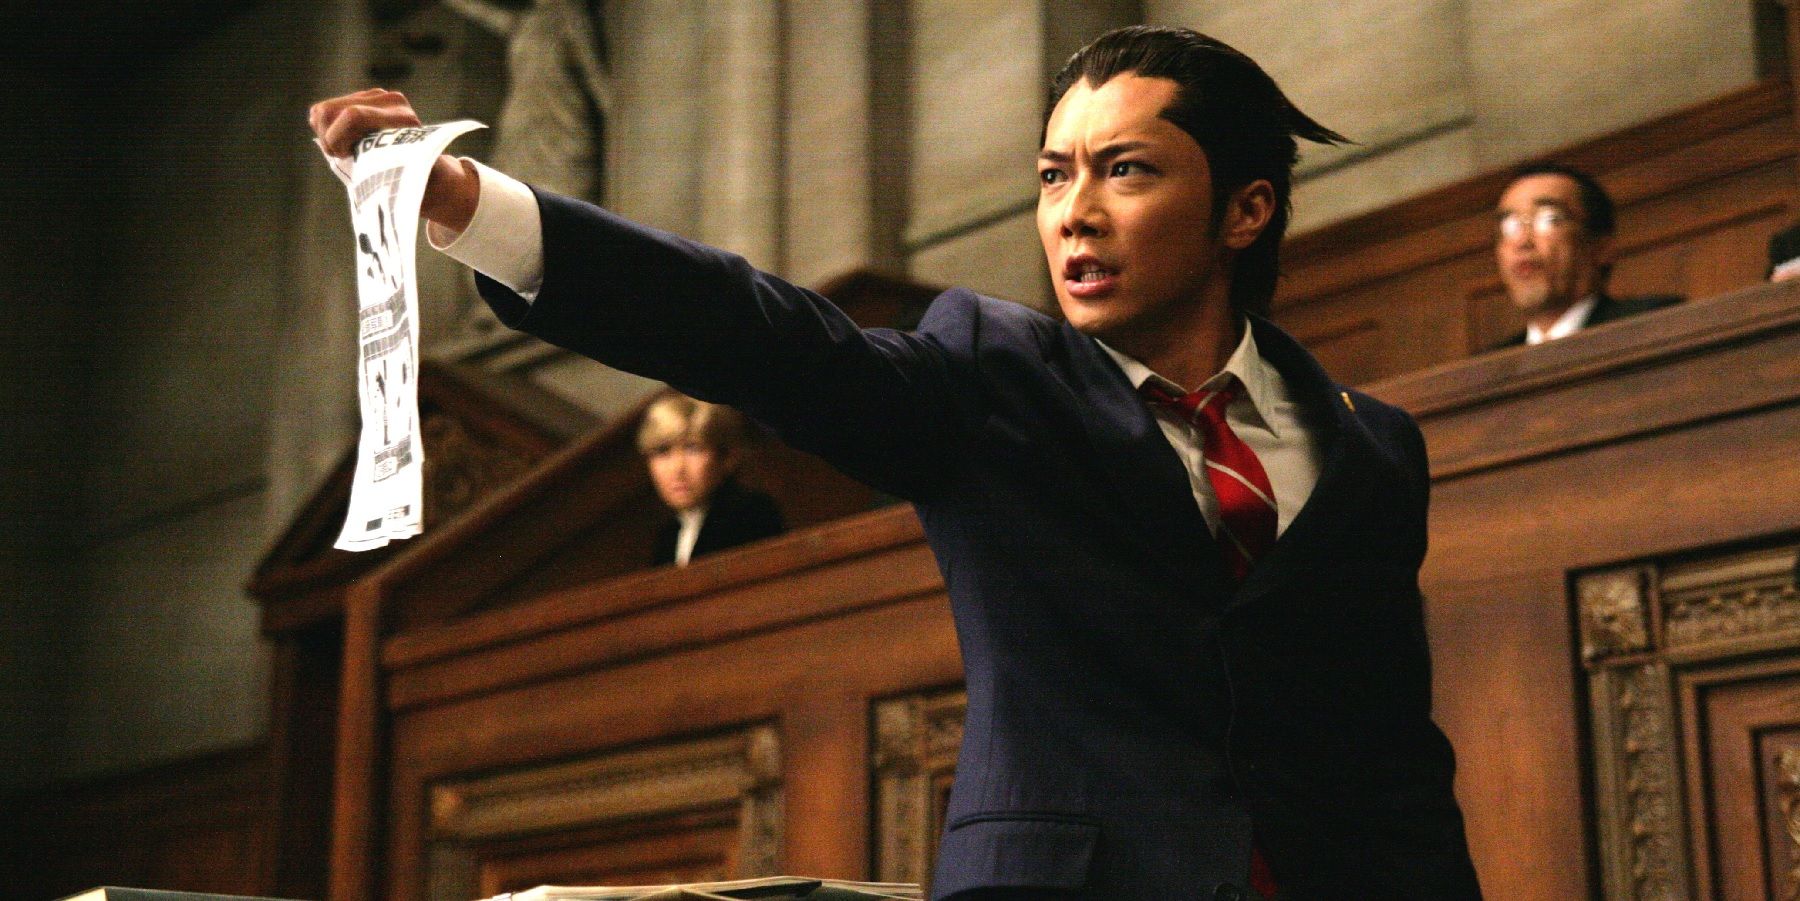 Phoenix Wright makes an objection during Takashi Miike's Ace Attorney movie.